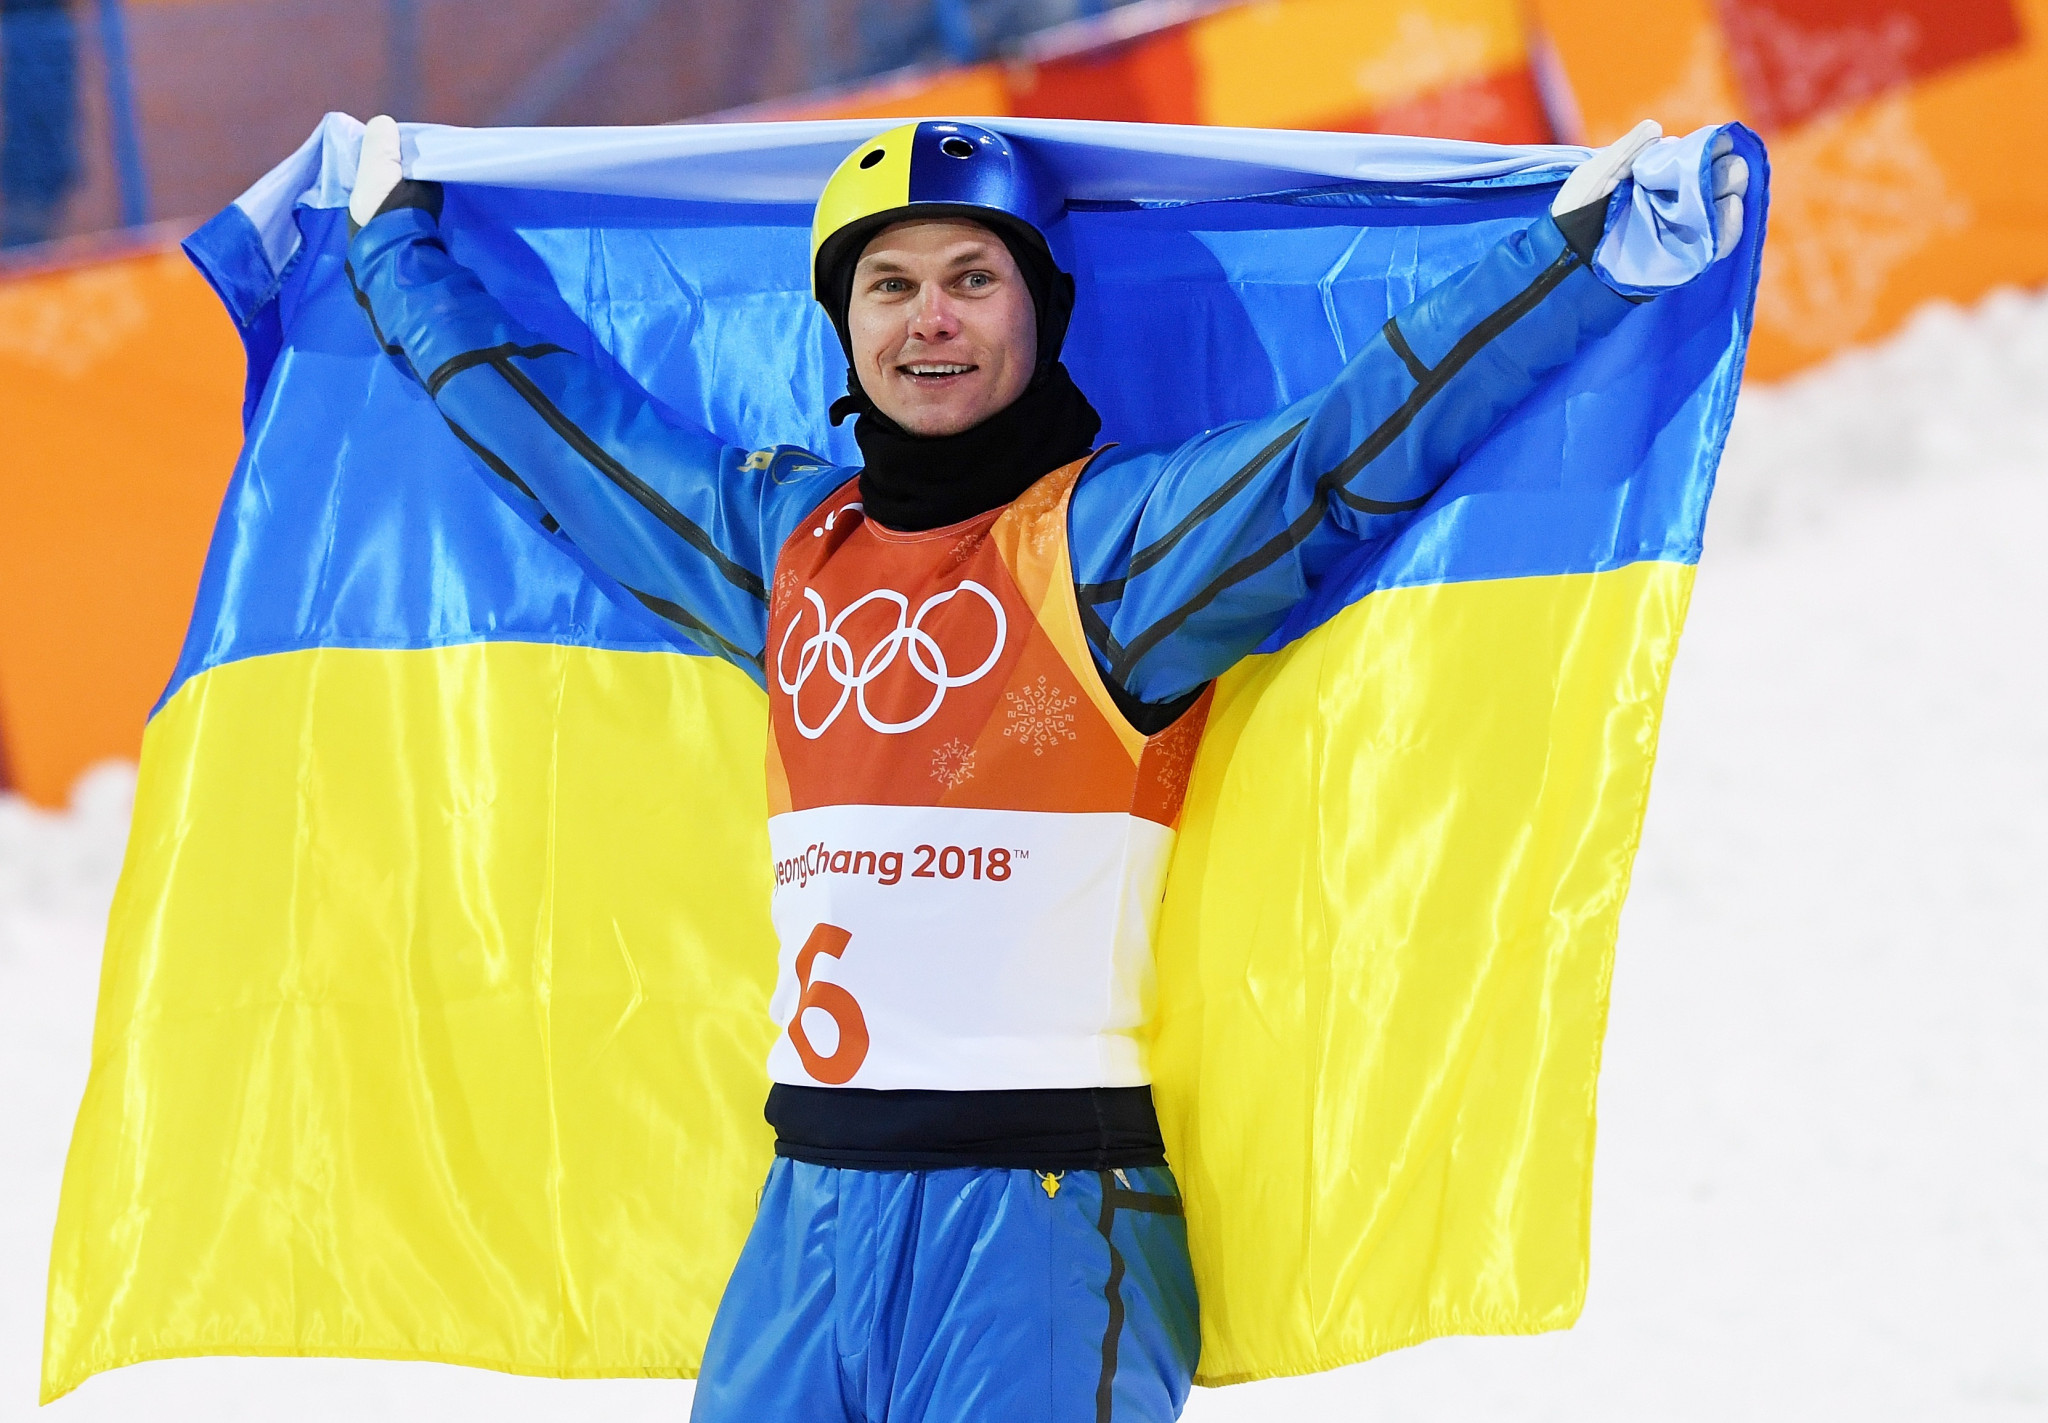 Freestyle skier Oleksandr Abramenko won the men’s freestyle skiing aerials event to claim Ukraine’s first gold medal of the Pyeongchang 2018 Winter Olympic Games today ©Getty Images